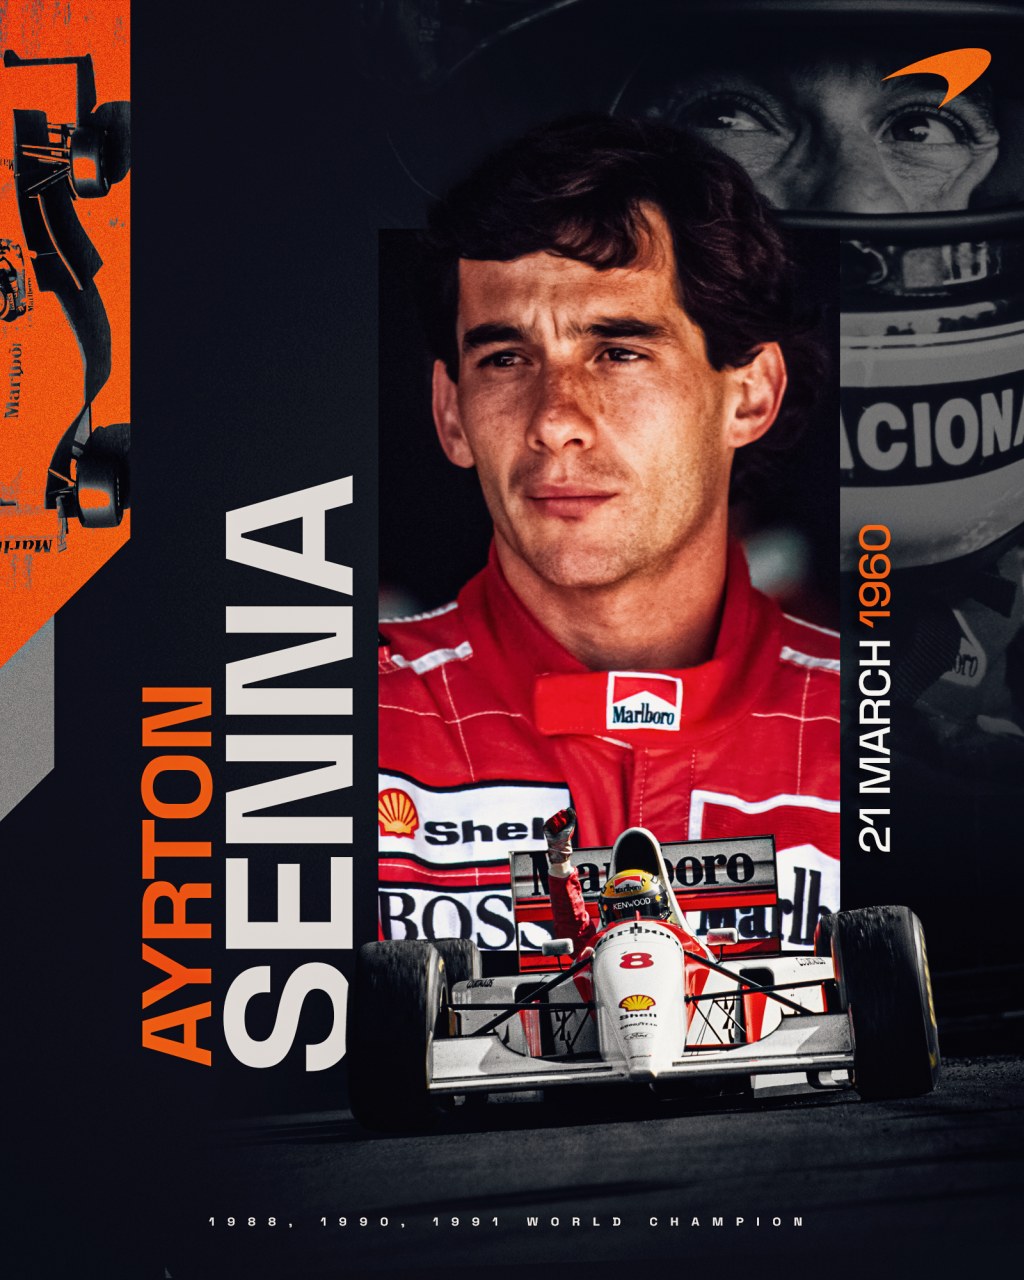 The Day Ayrton Senna Died and How I Remember It